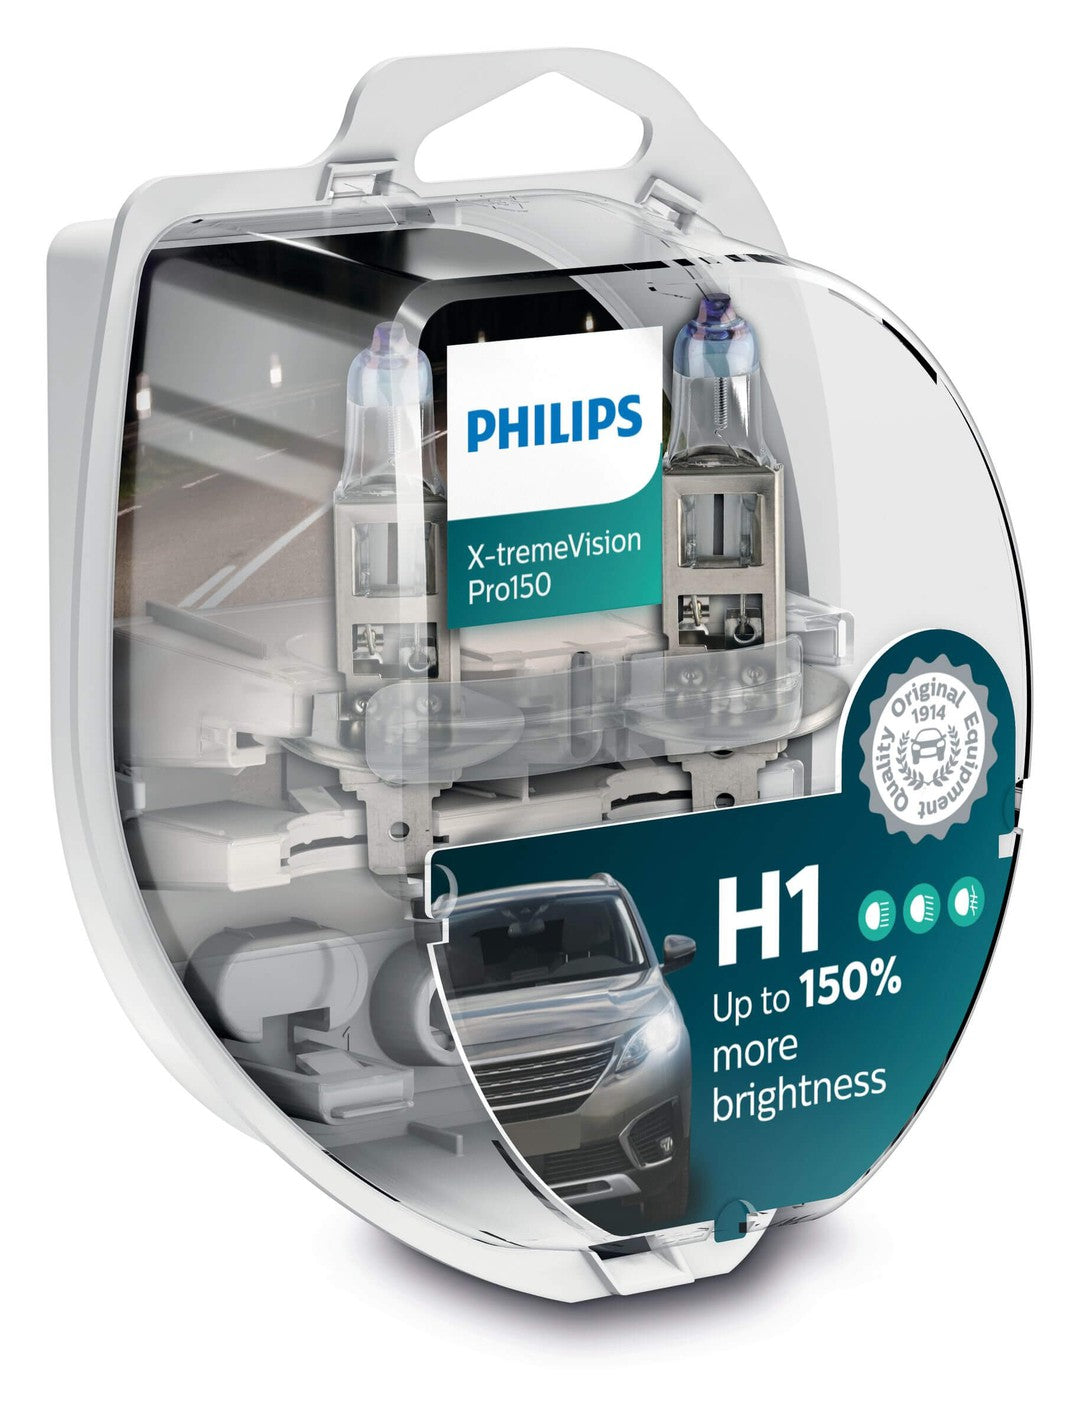 Philips 12258XVPS2 H1 forlygter X-tremeVision Pro150